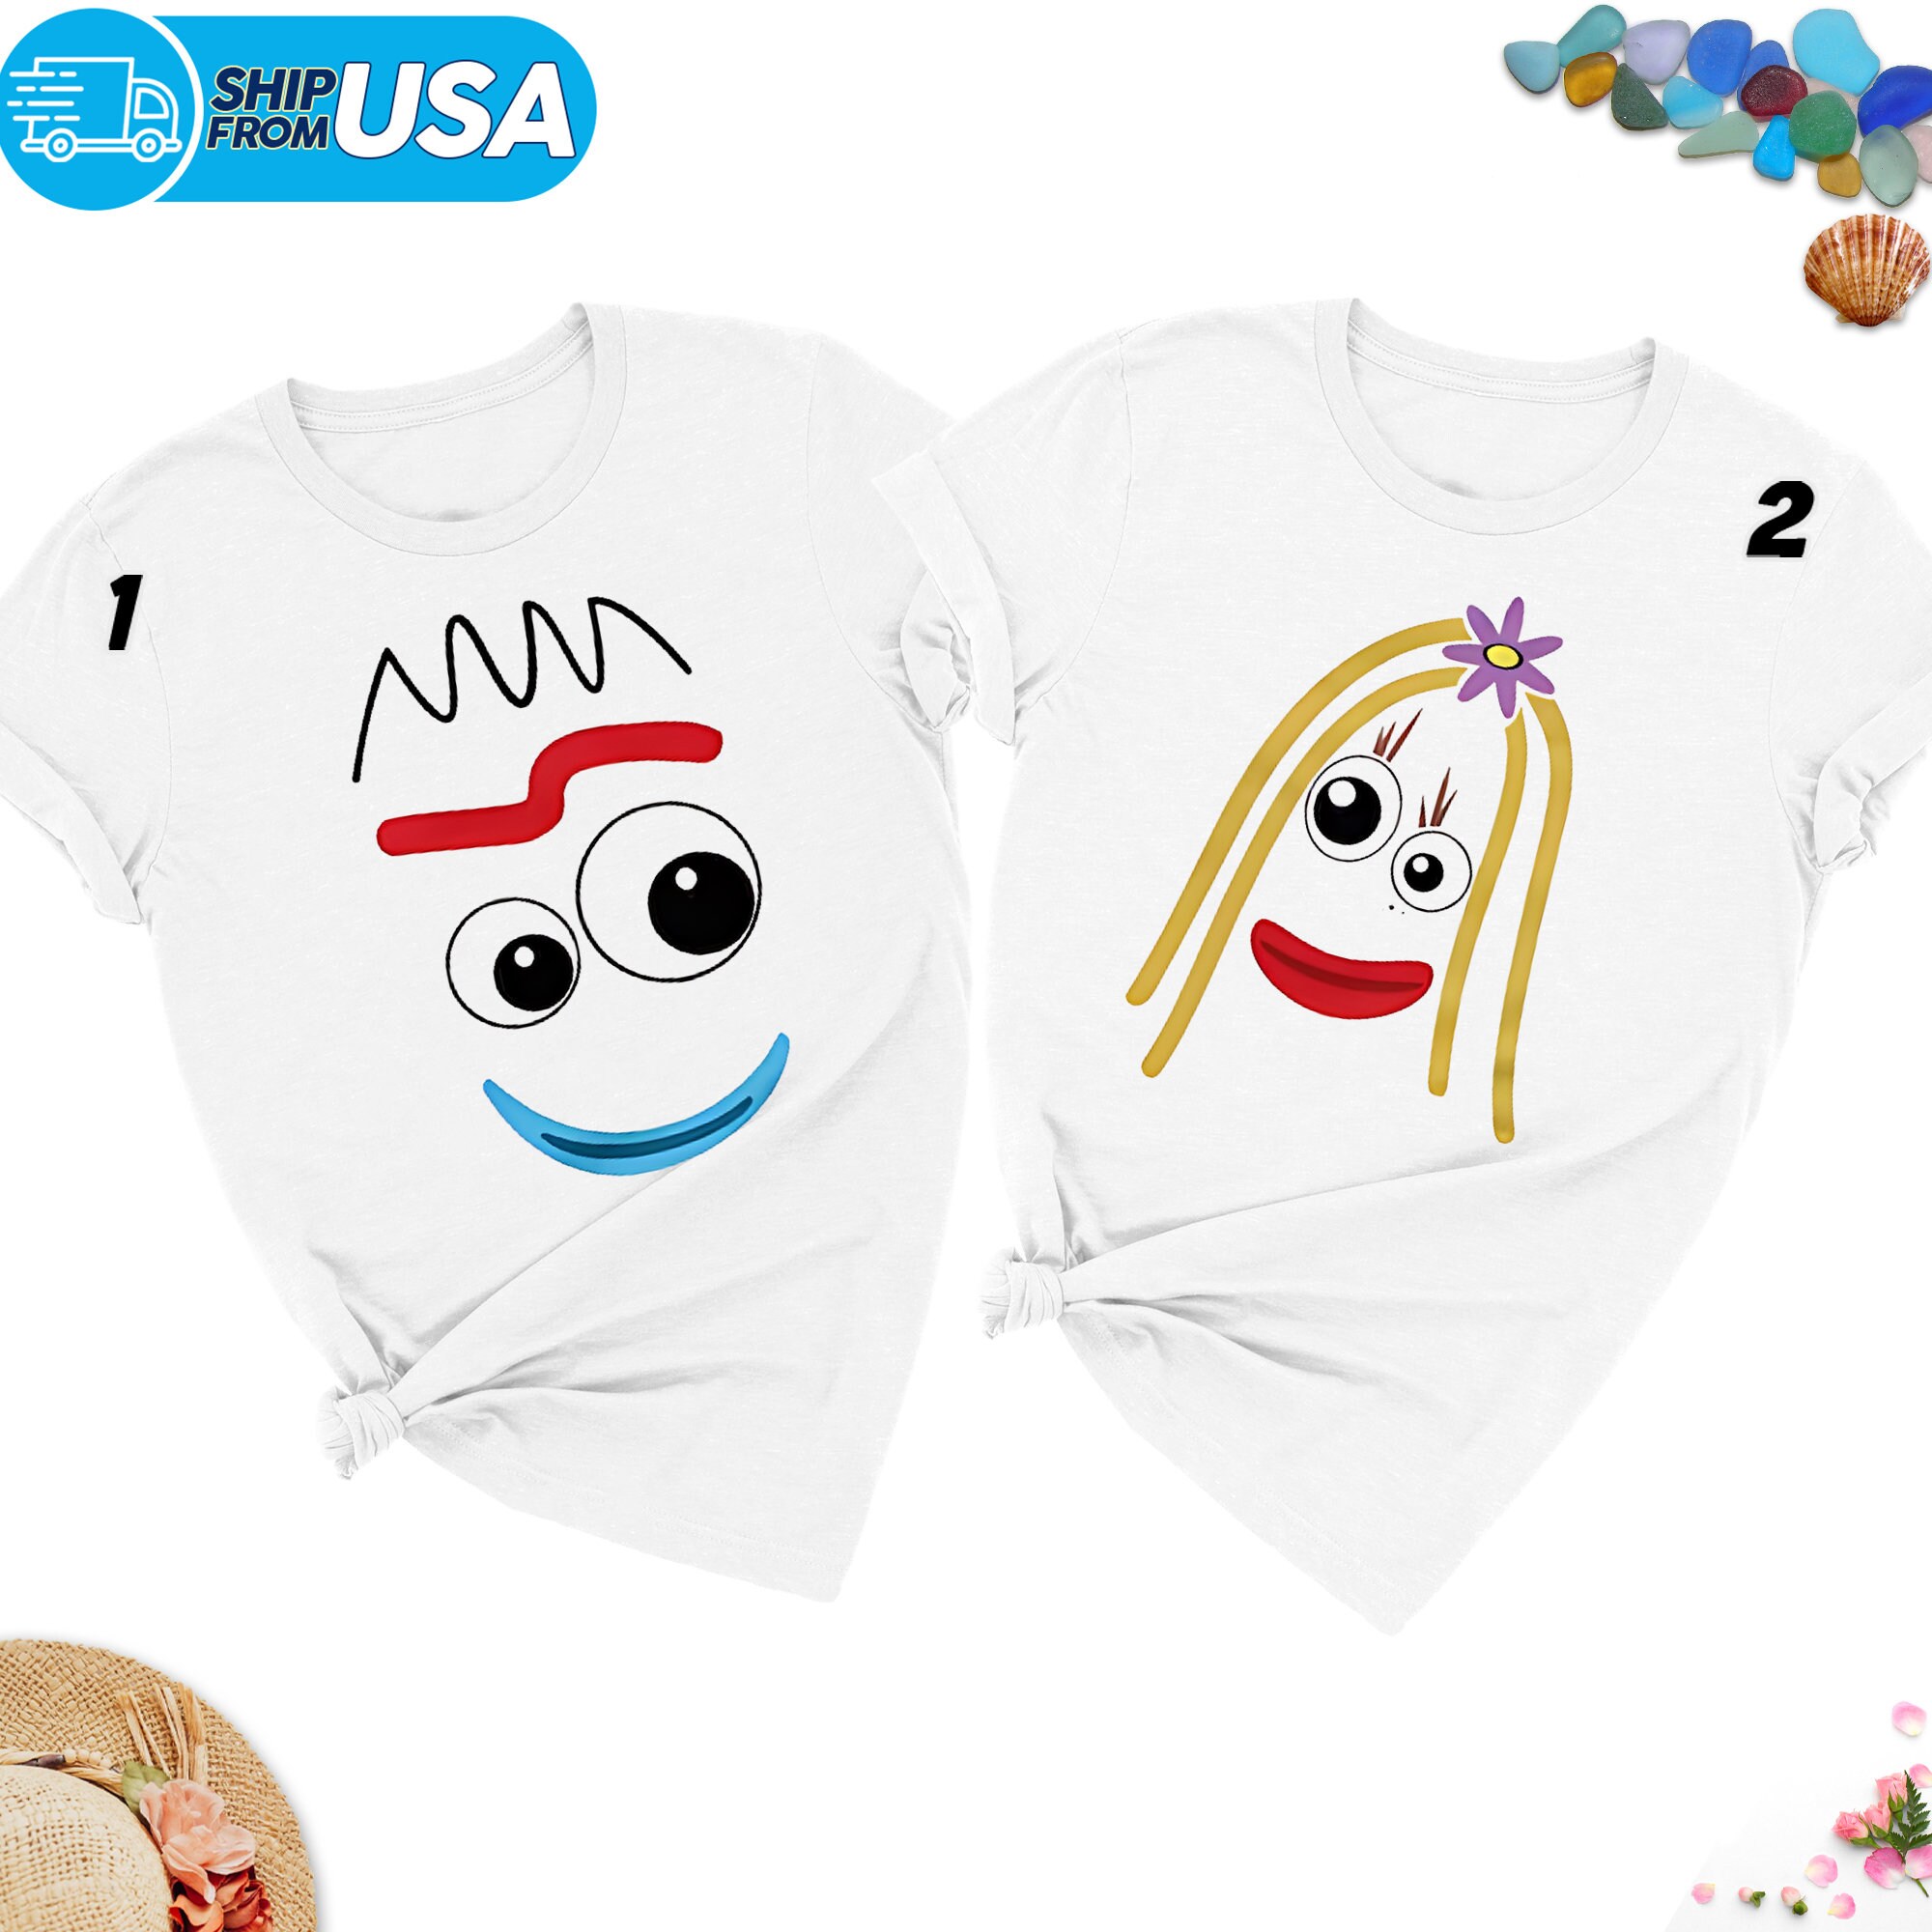 Discover Toy Couple Matching T-Shirts, Toy Costume Group Halloween Shirt, Toy Animated Inspired Family Tee, Spoon Knife Toy Shirt For Kid/Adult